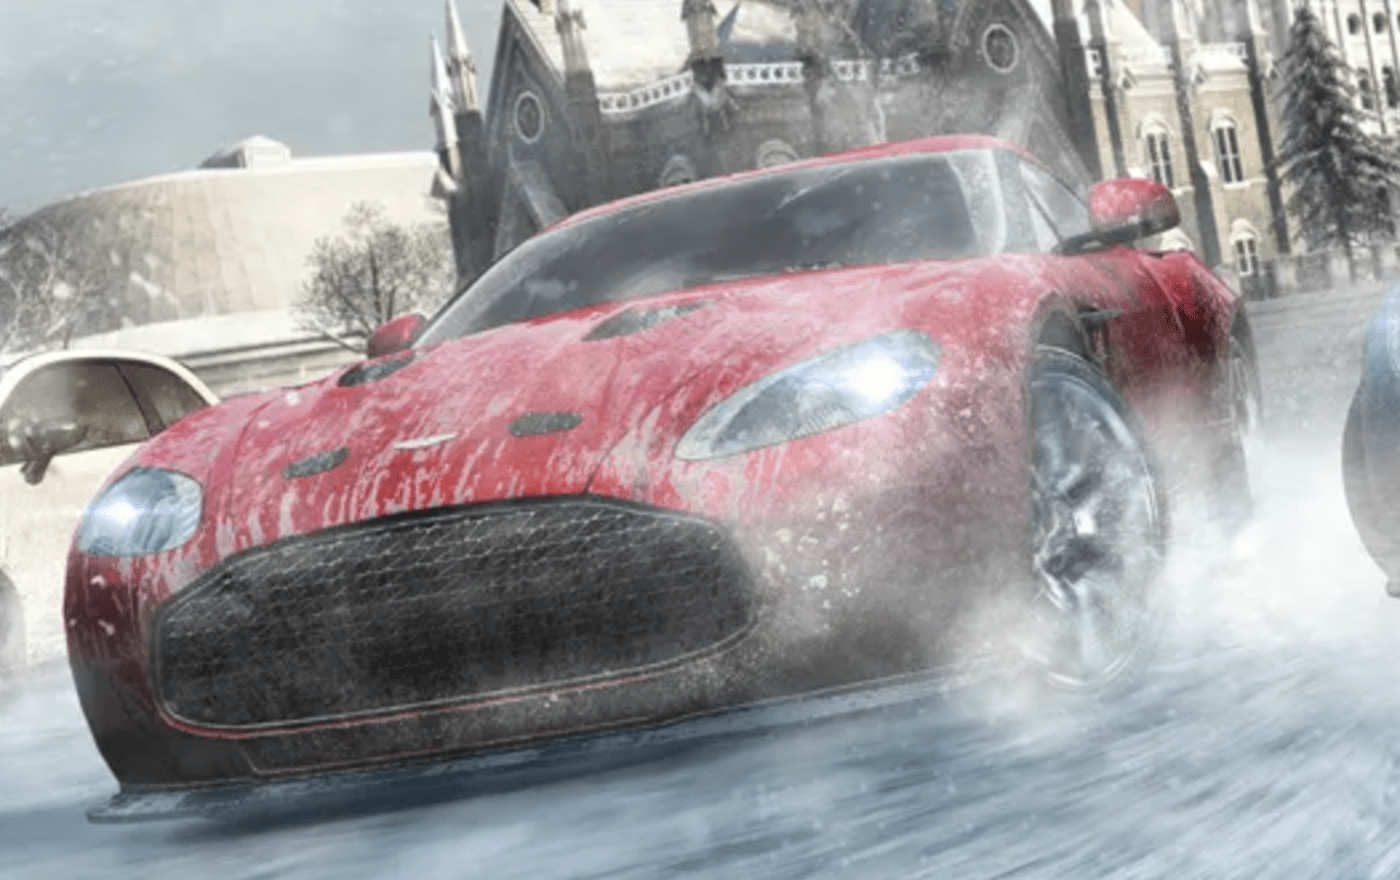 Ubisoft is deleting The Crew from players' libraries, reminding us we own nothing